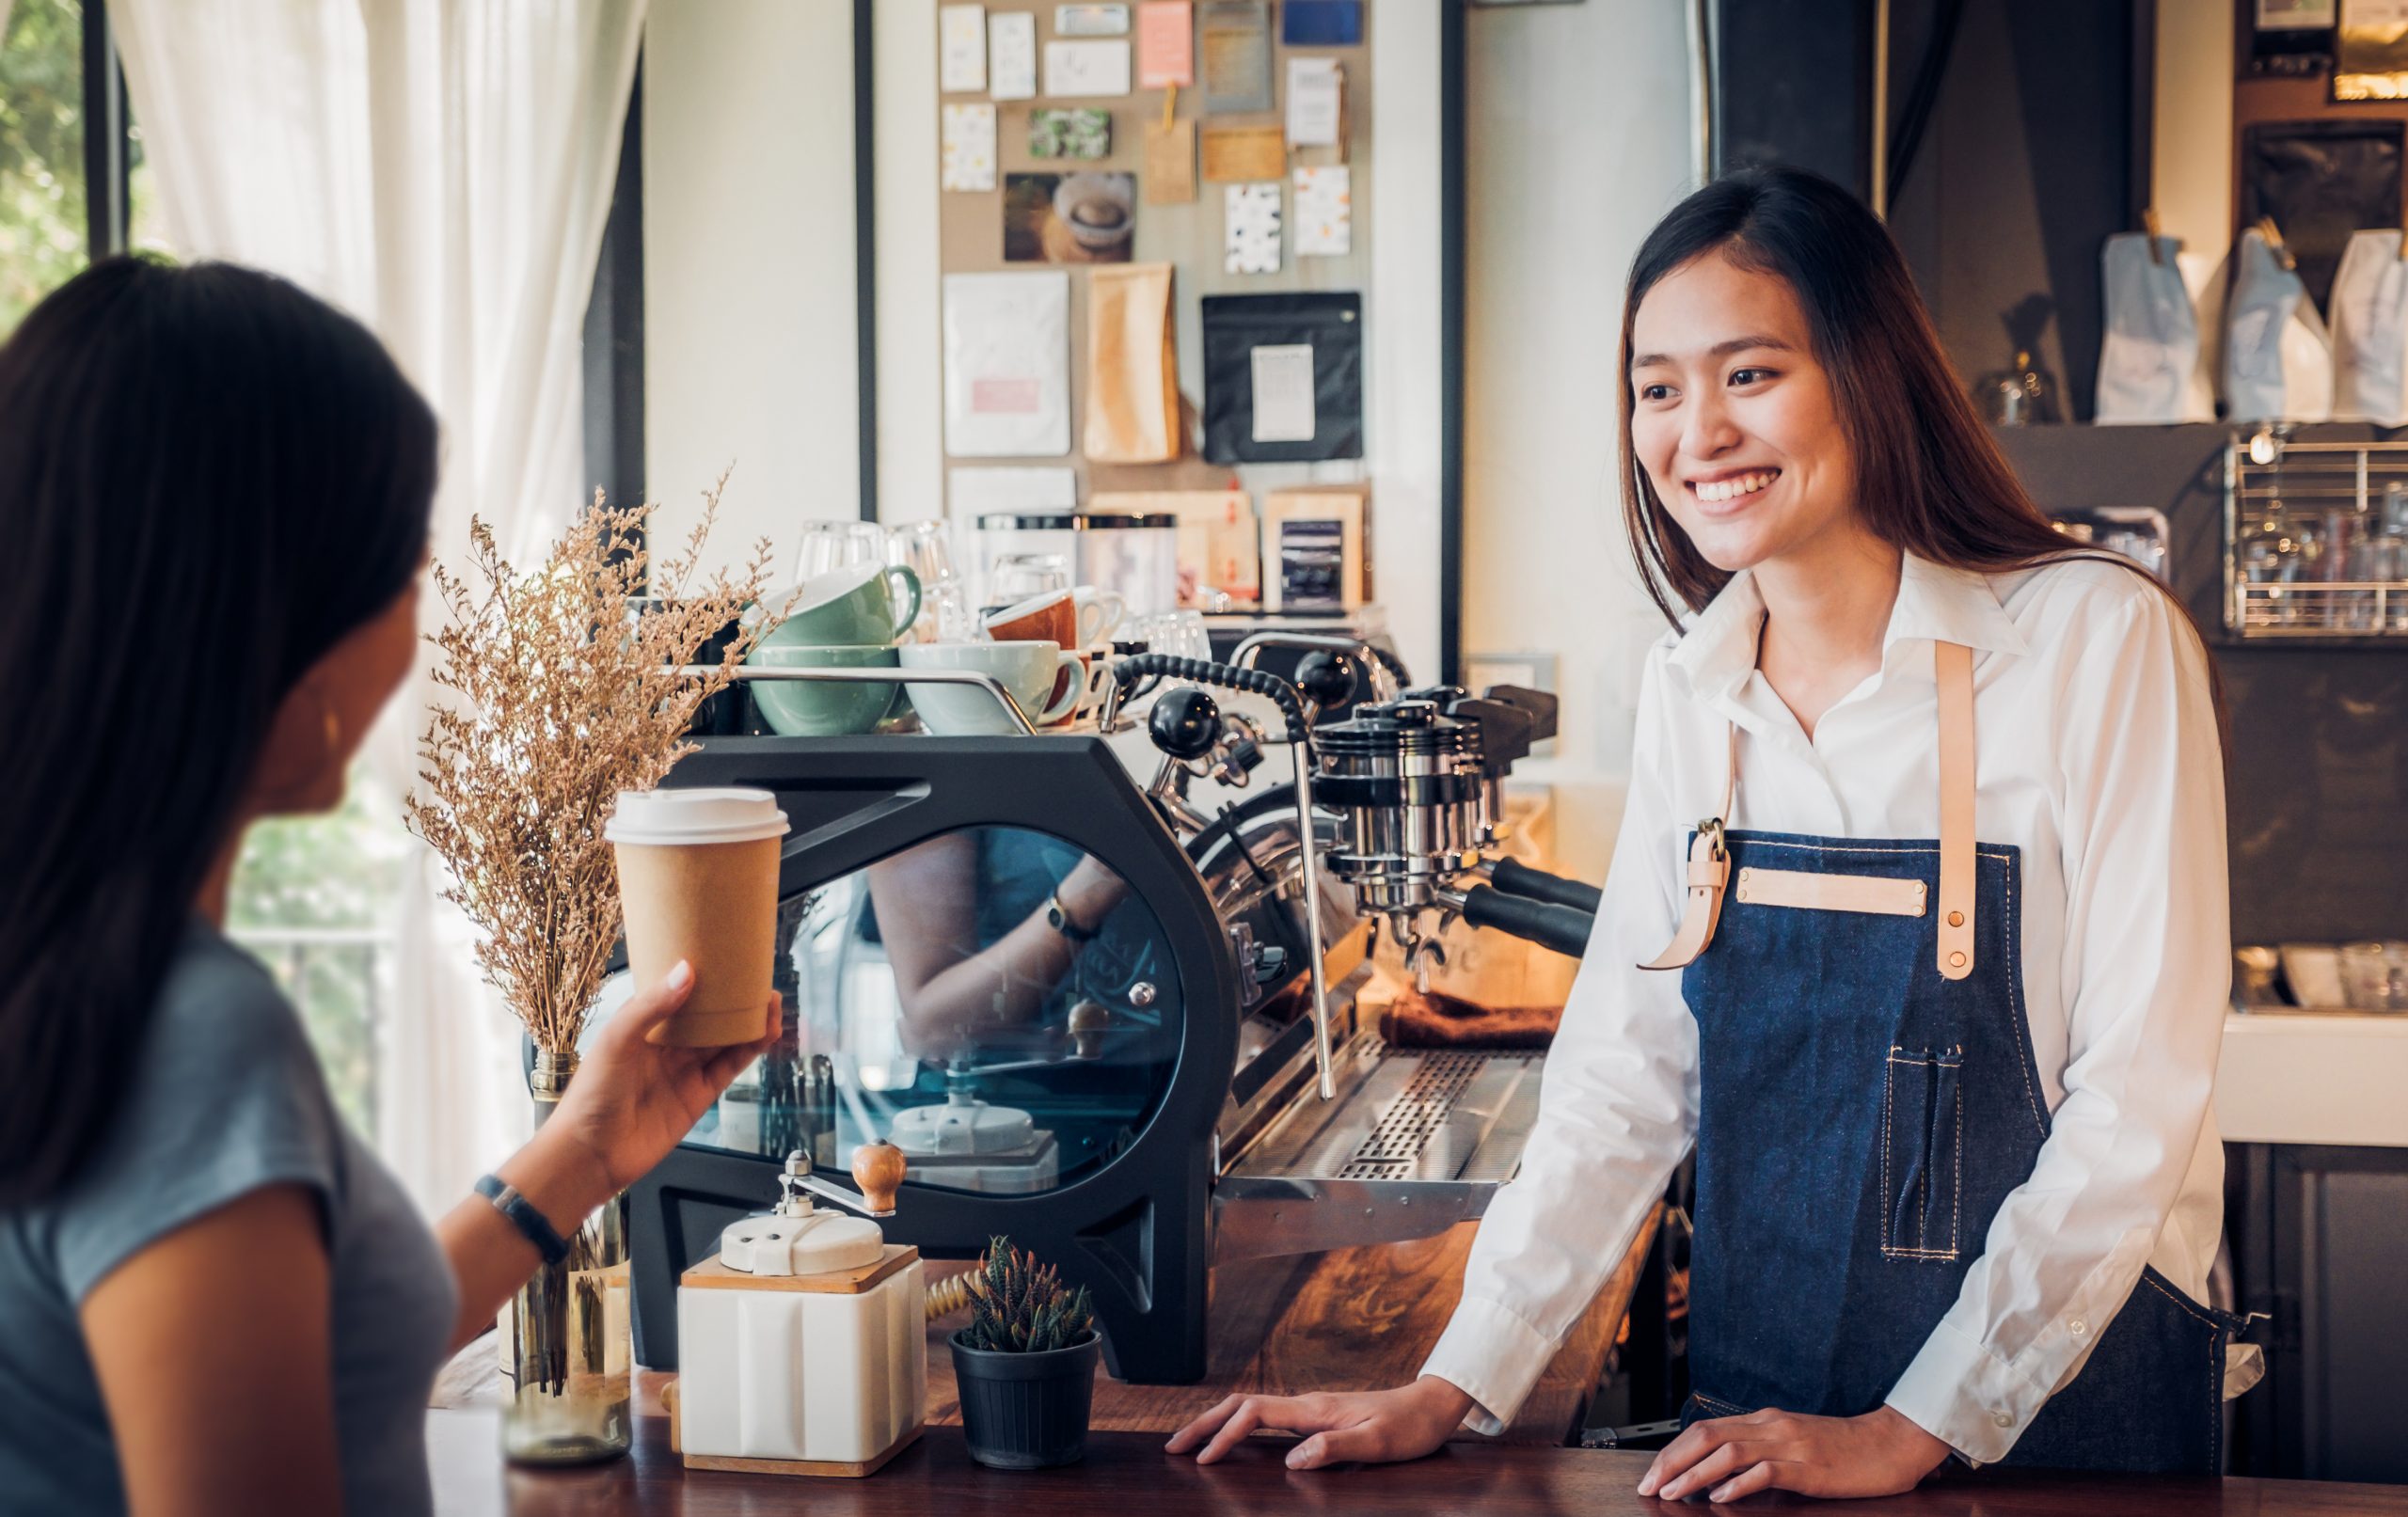 Asian woman barista and owner of coffee franchise small business concept.